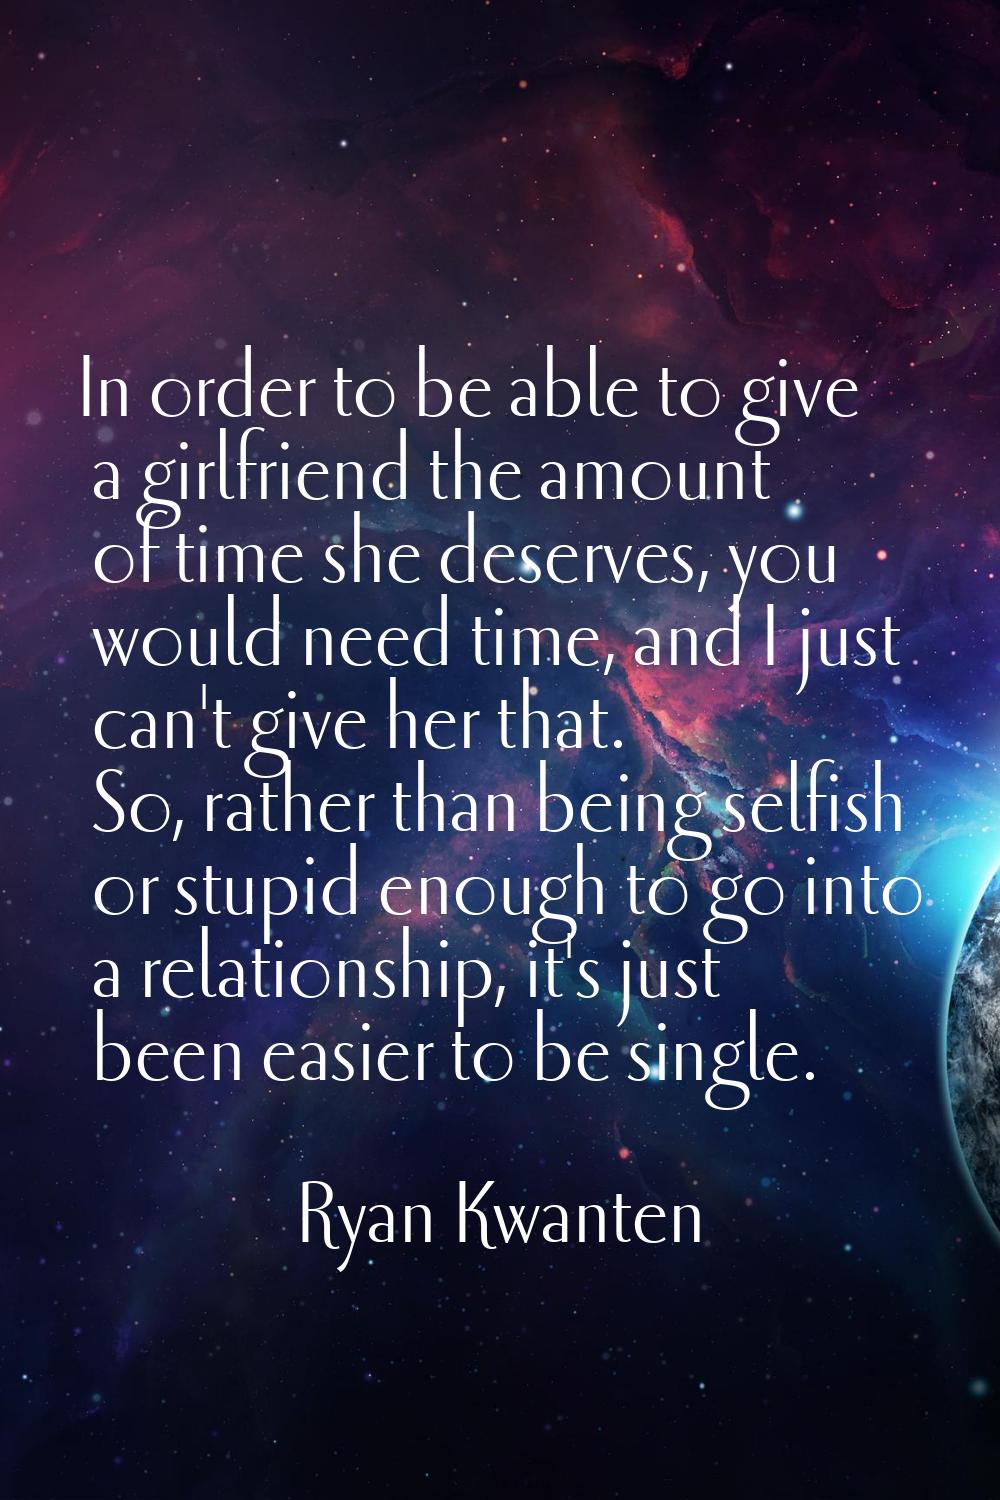 In order to be able to give a girlfriend the amount of time she deserves, you would need time, and 